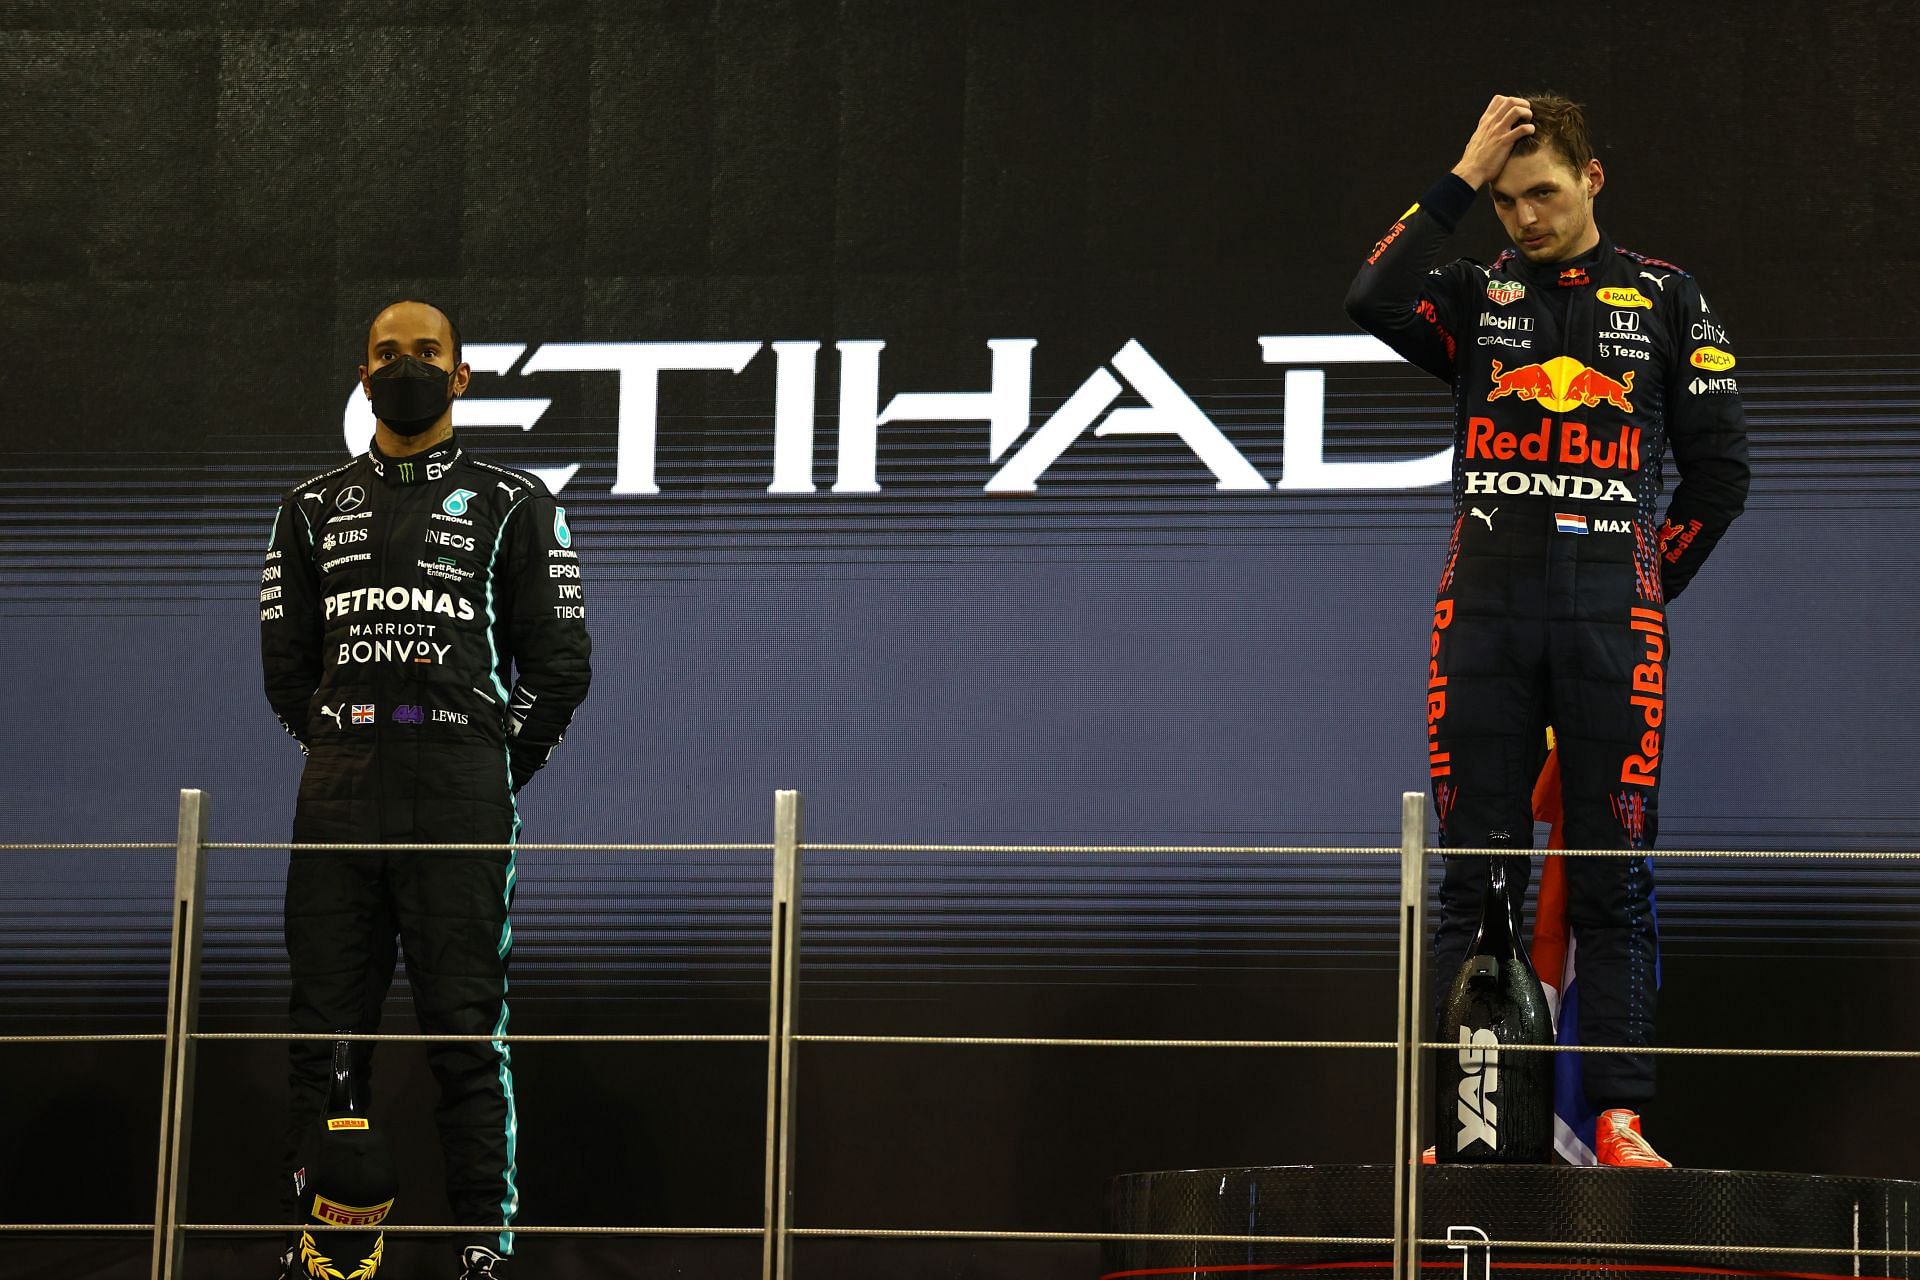 Lewis Hamilton (left) and Max Verstappen (right) (Photo by Bryn Lennon/Getty Images)